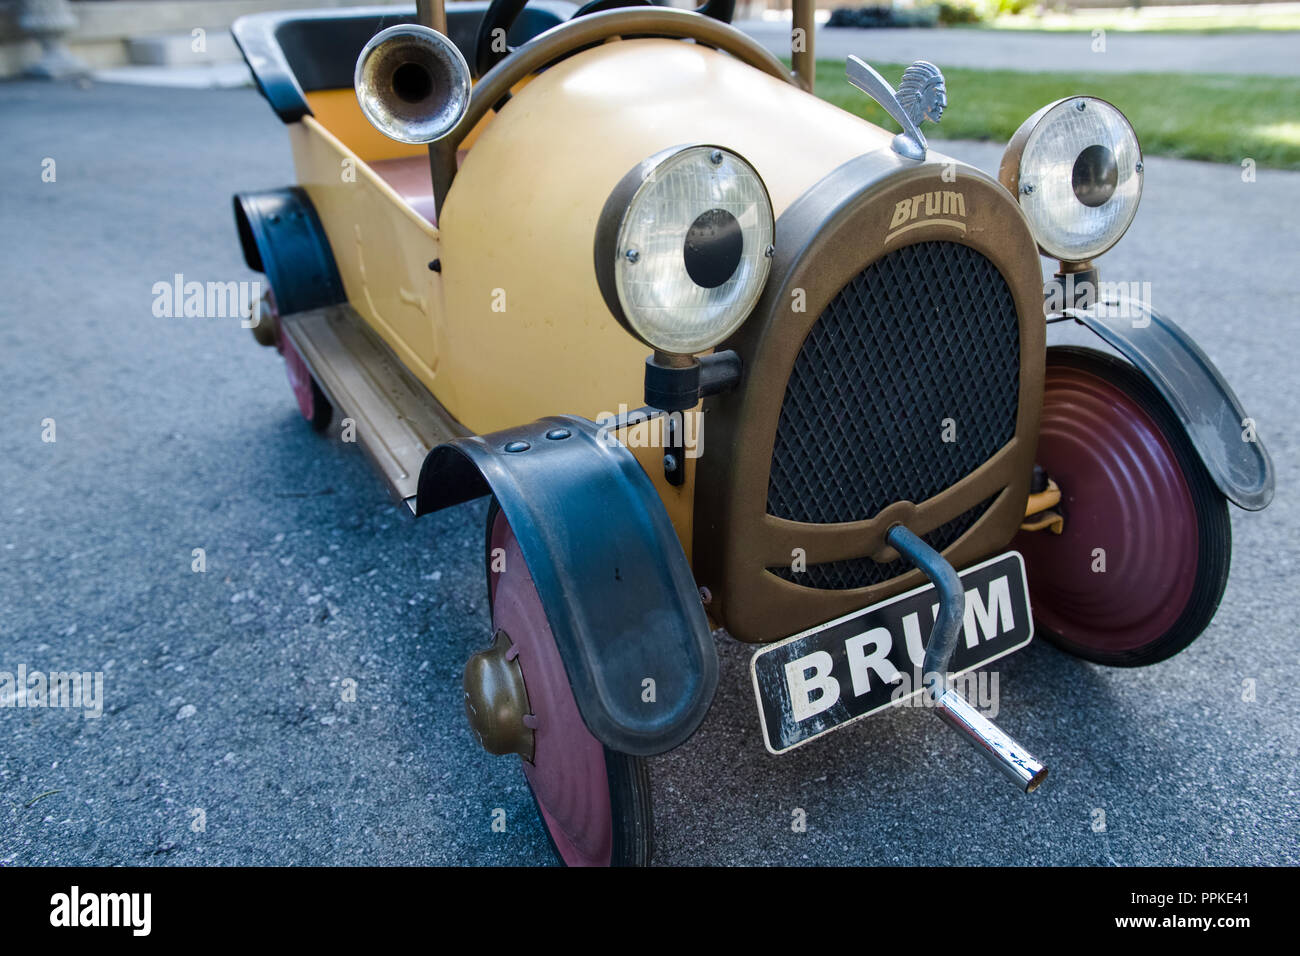 Replica (pedal car) of the famous BRUM, main character of the very  successful TV series for kids. Front viewed Stock Photo - Alamy